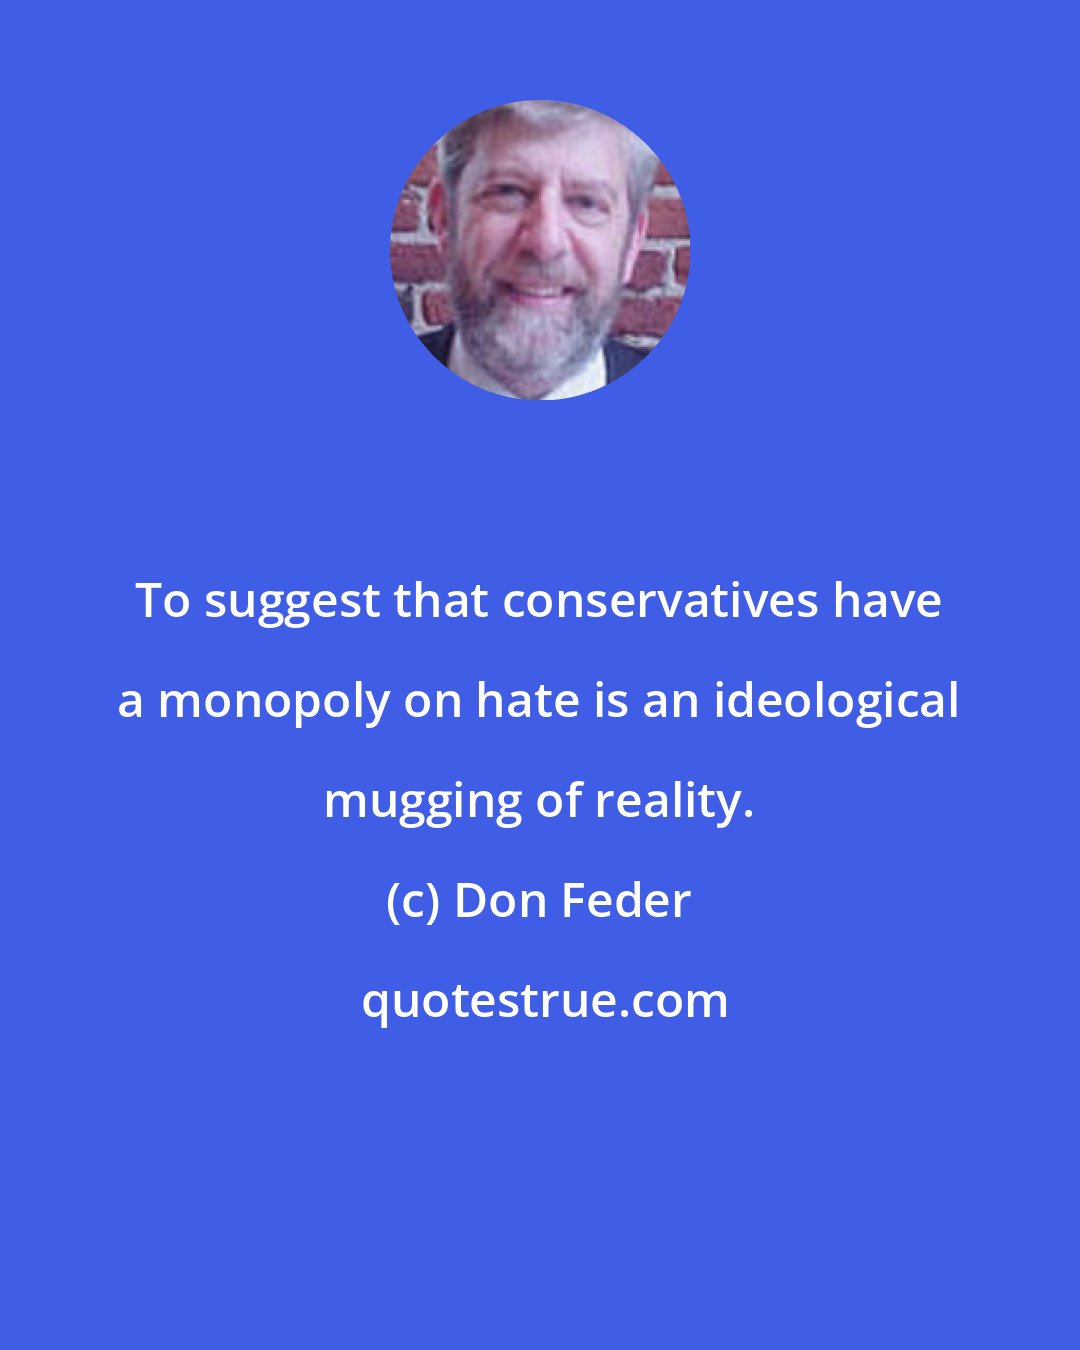 Don Feder: To suggest that conservatives have a monopoly on hate is an ideological mugging of reality.